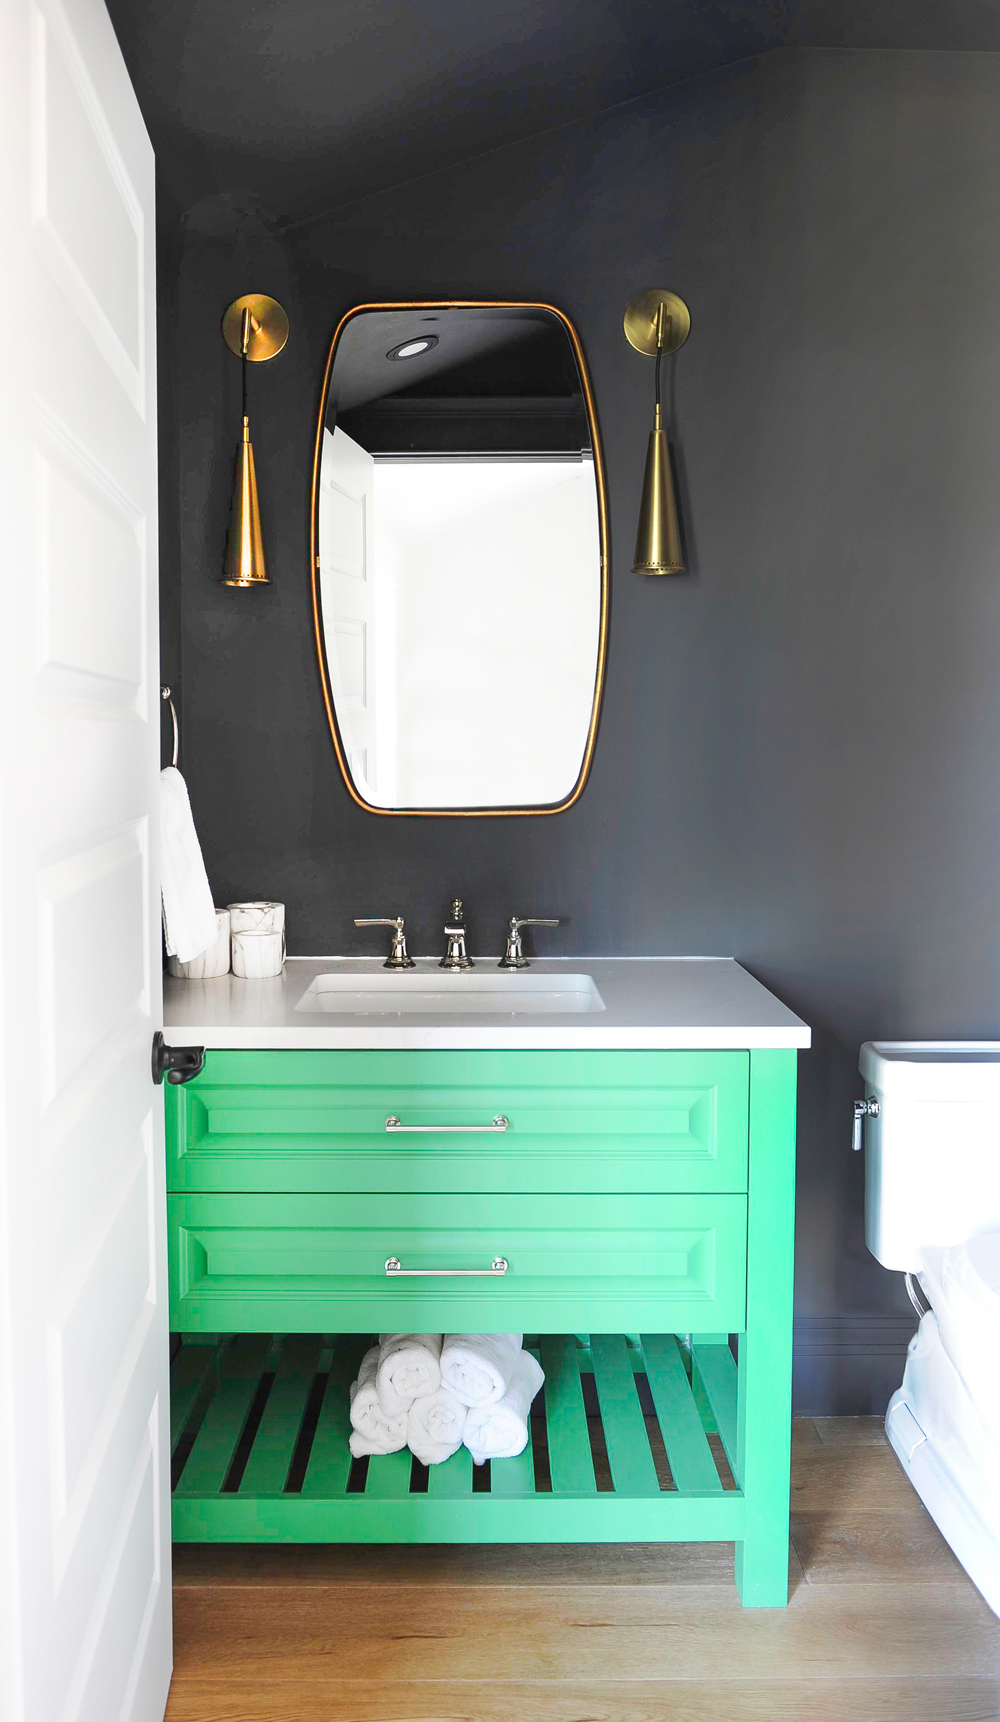 A small bathroom with dark grey walls offset by bright pastel green cabinetry